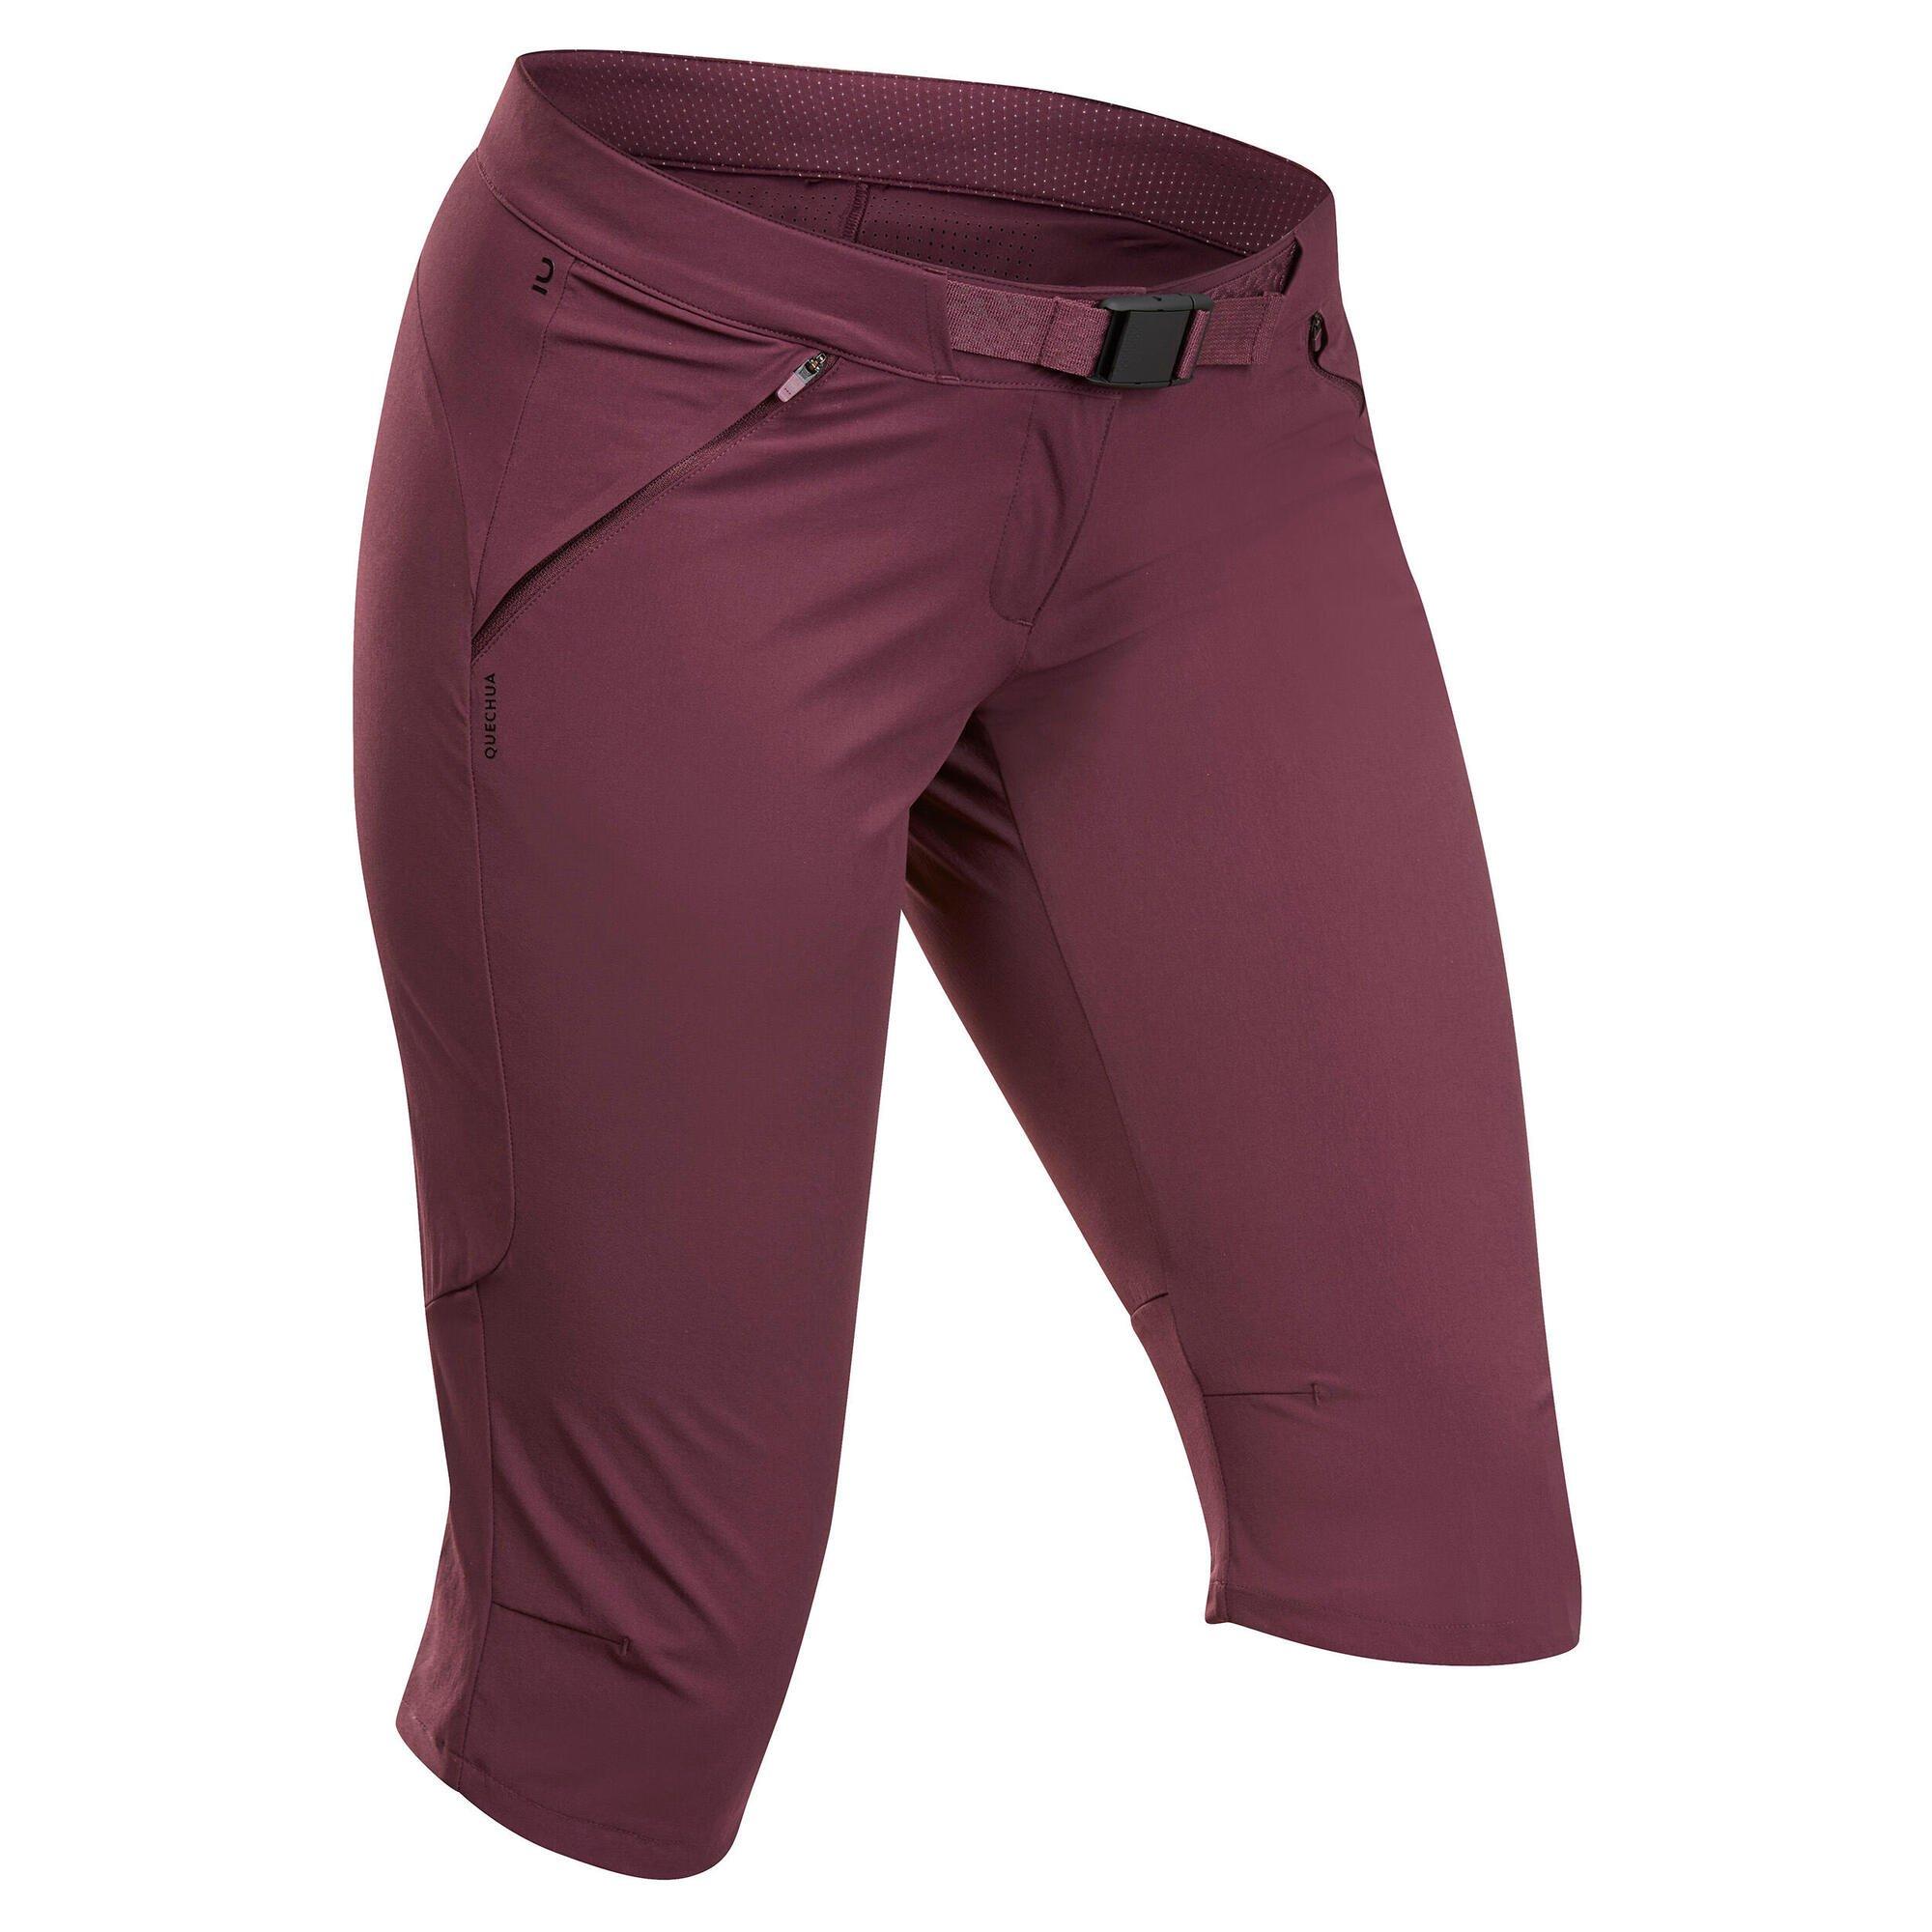 Decathlon Cropped Mountain Walking Trousers Mh500